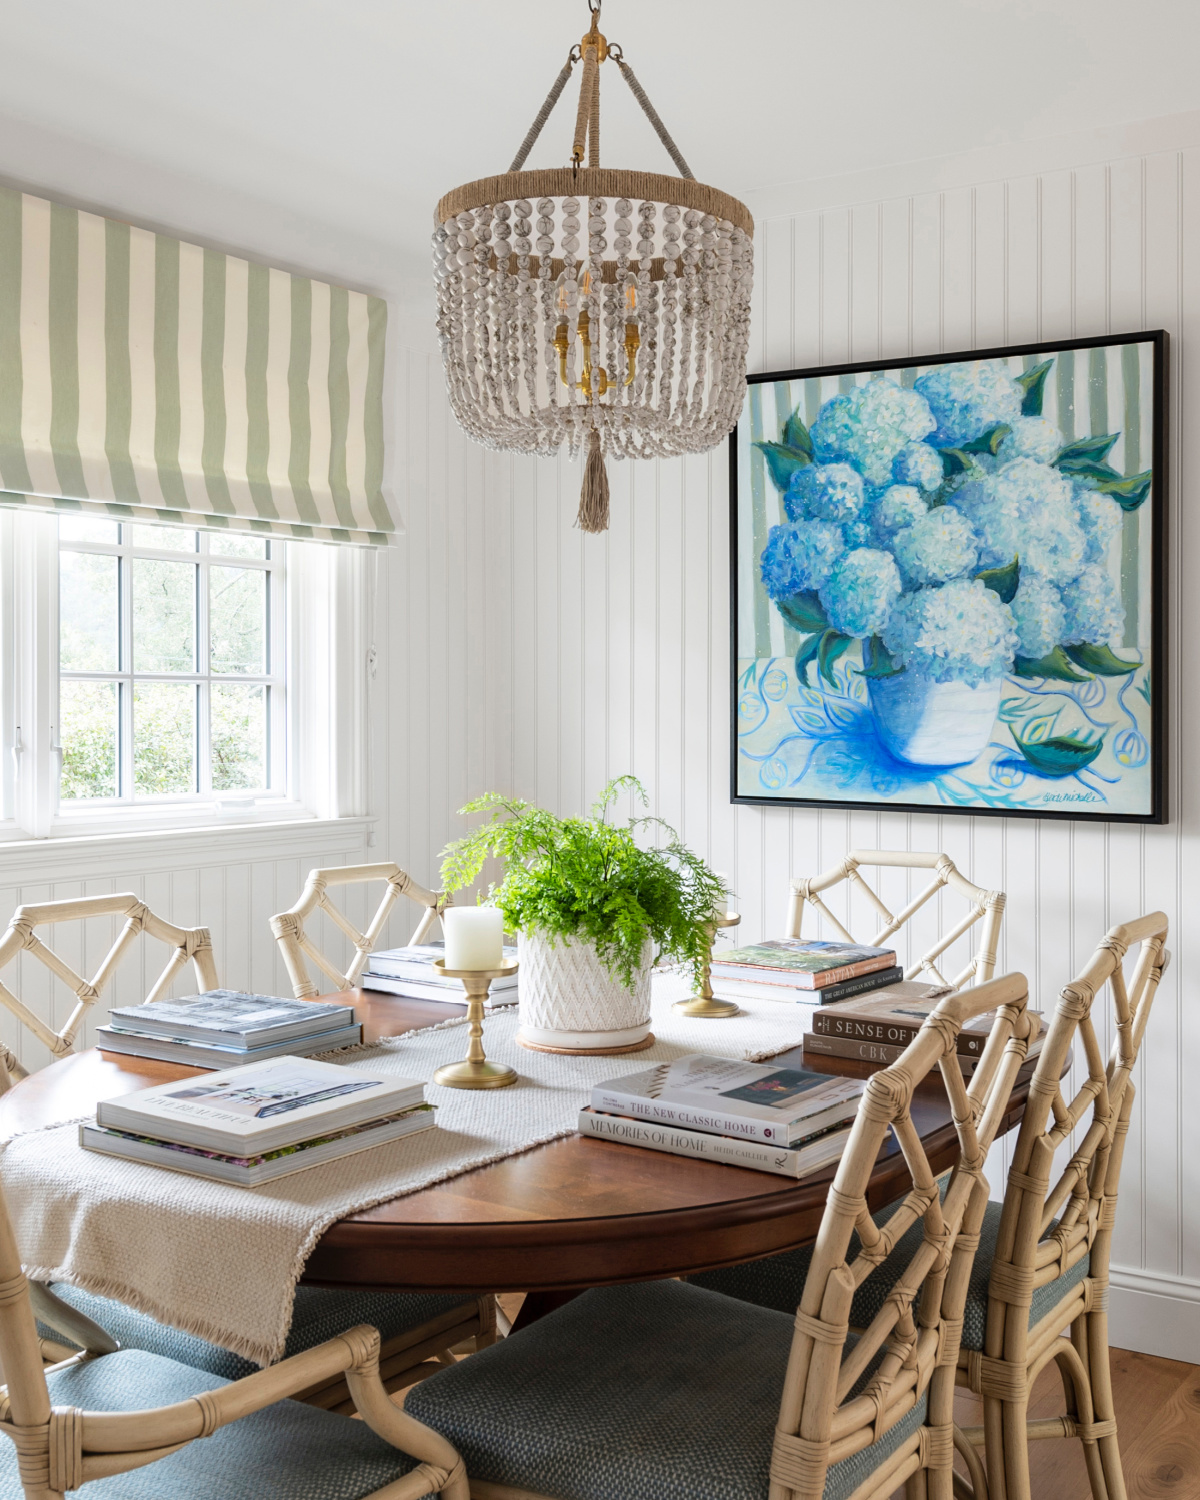 Casual dining room with hydrangea art and books at place settings.